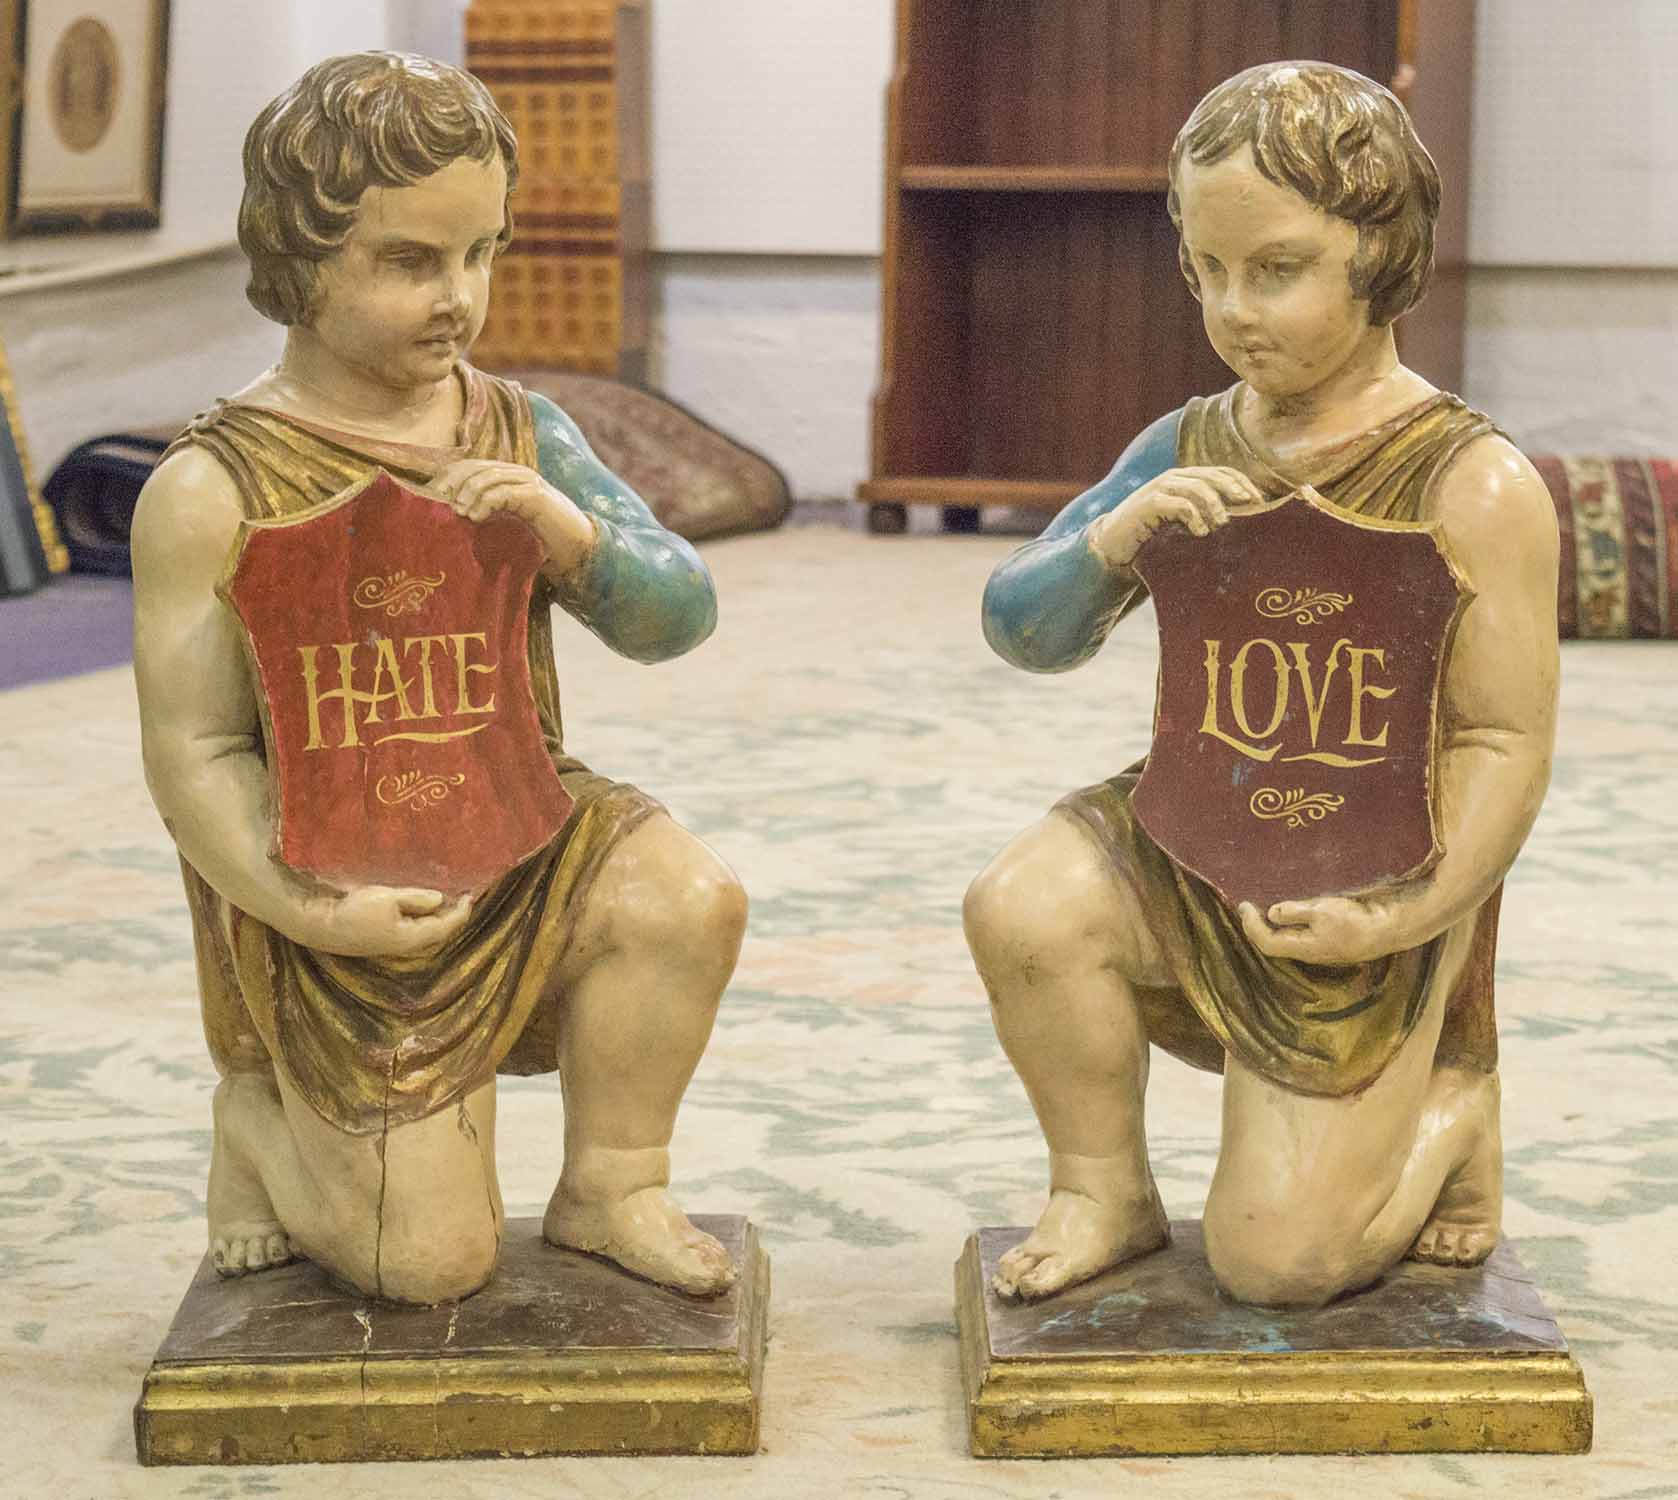 KNEELING FIGURES, a pair, 19th century polychrome and giltwood,